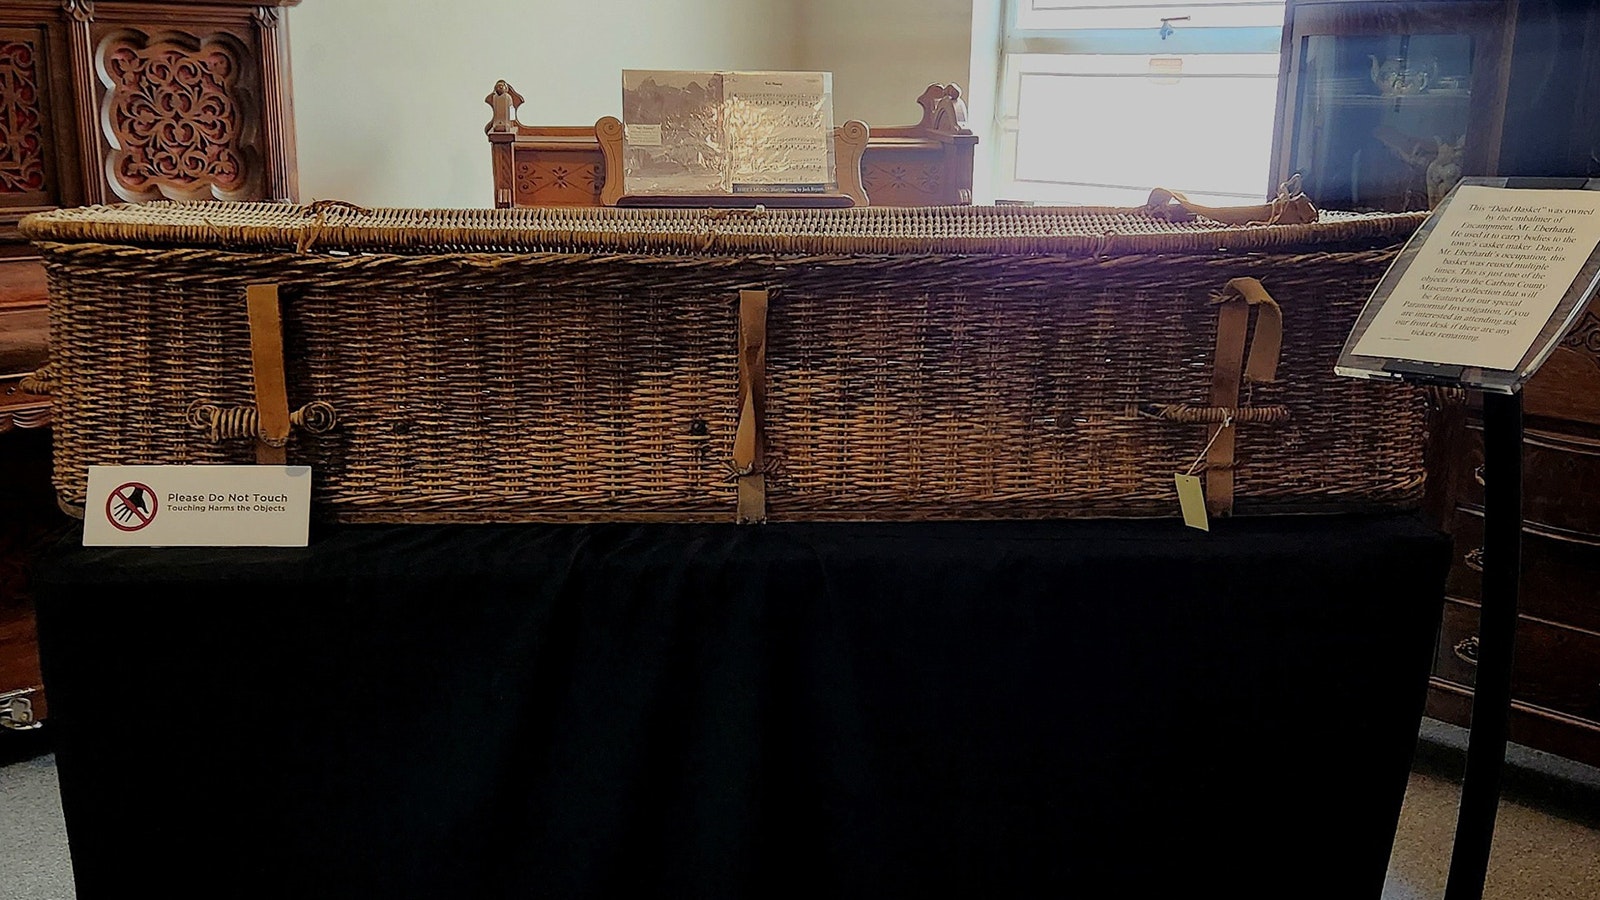 This large wicker basket was used by a funeral home in Encampment to transport bodies for embalming.